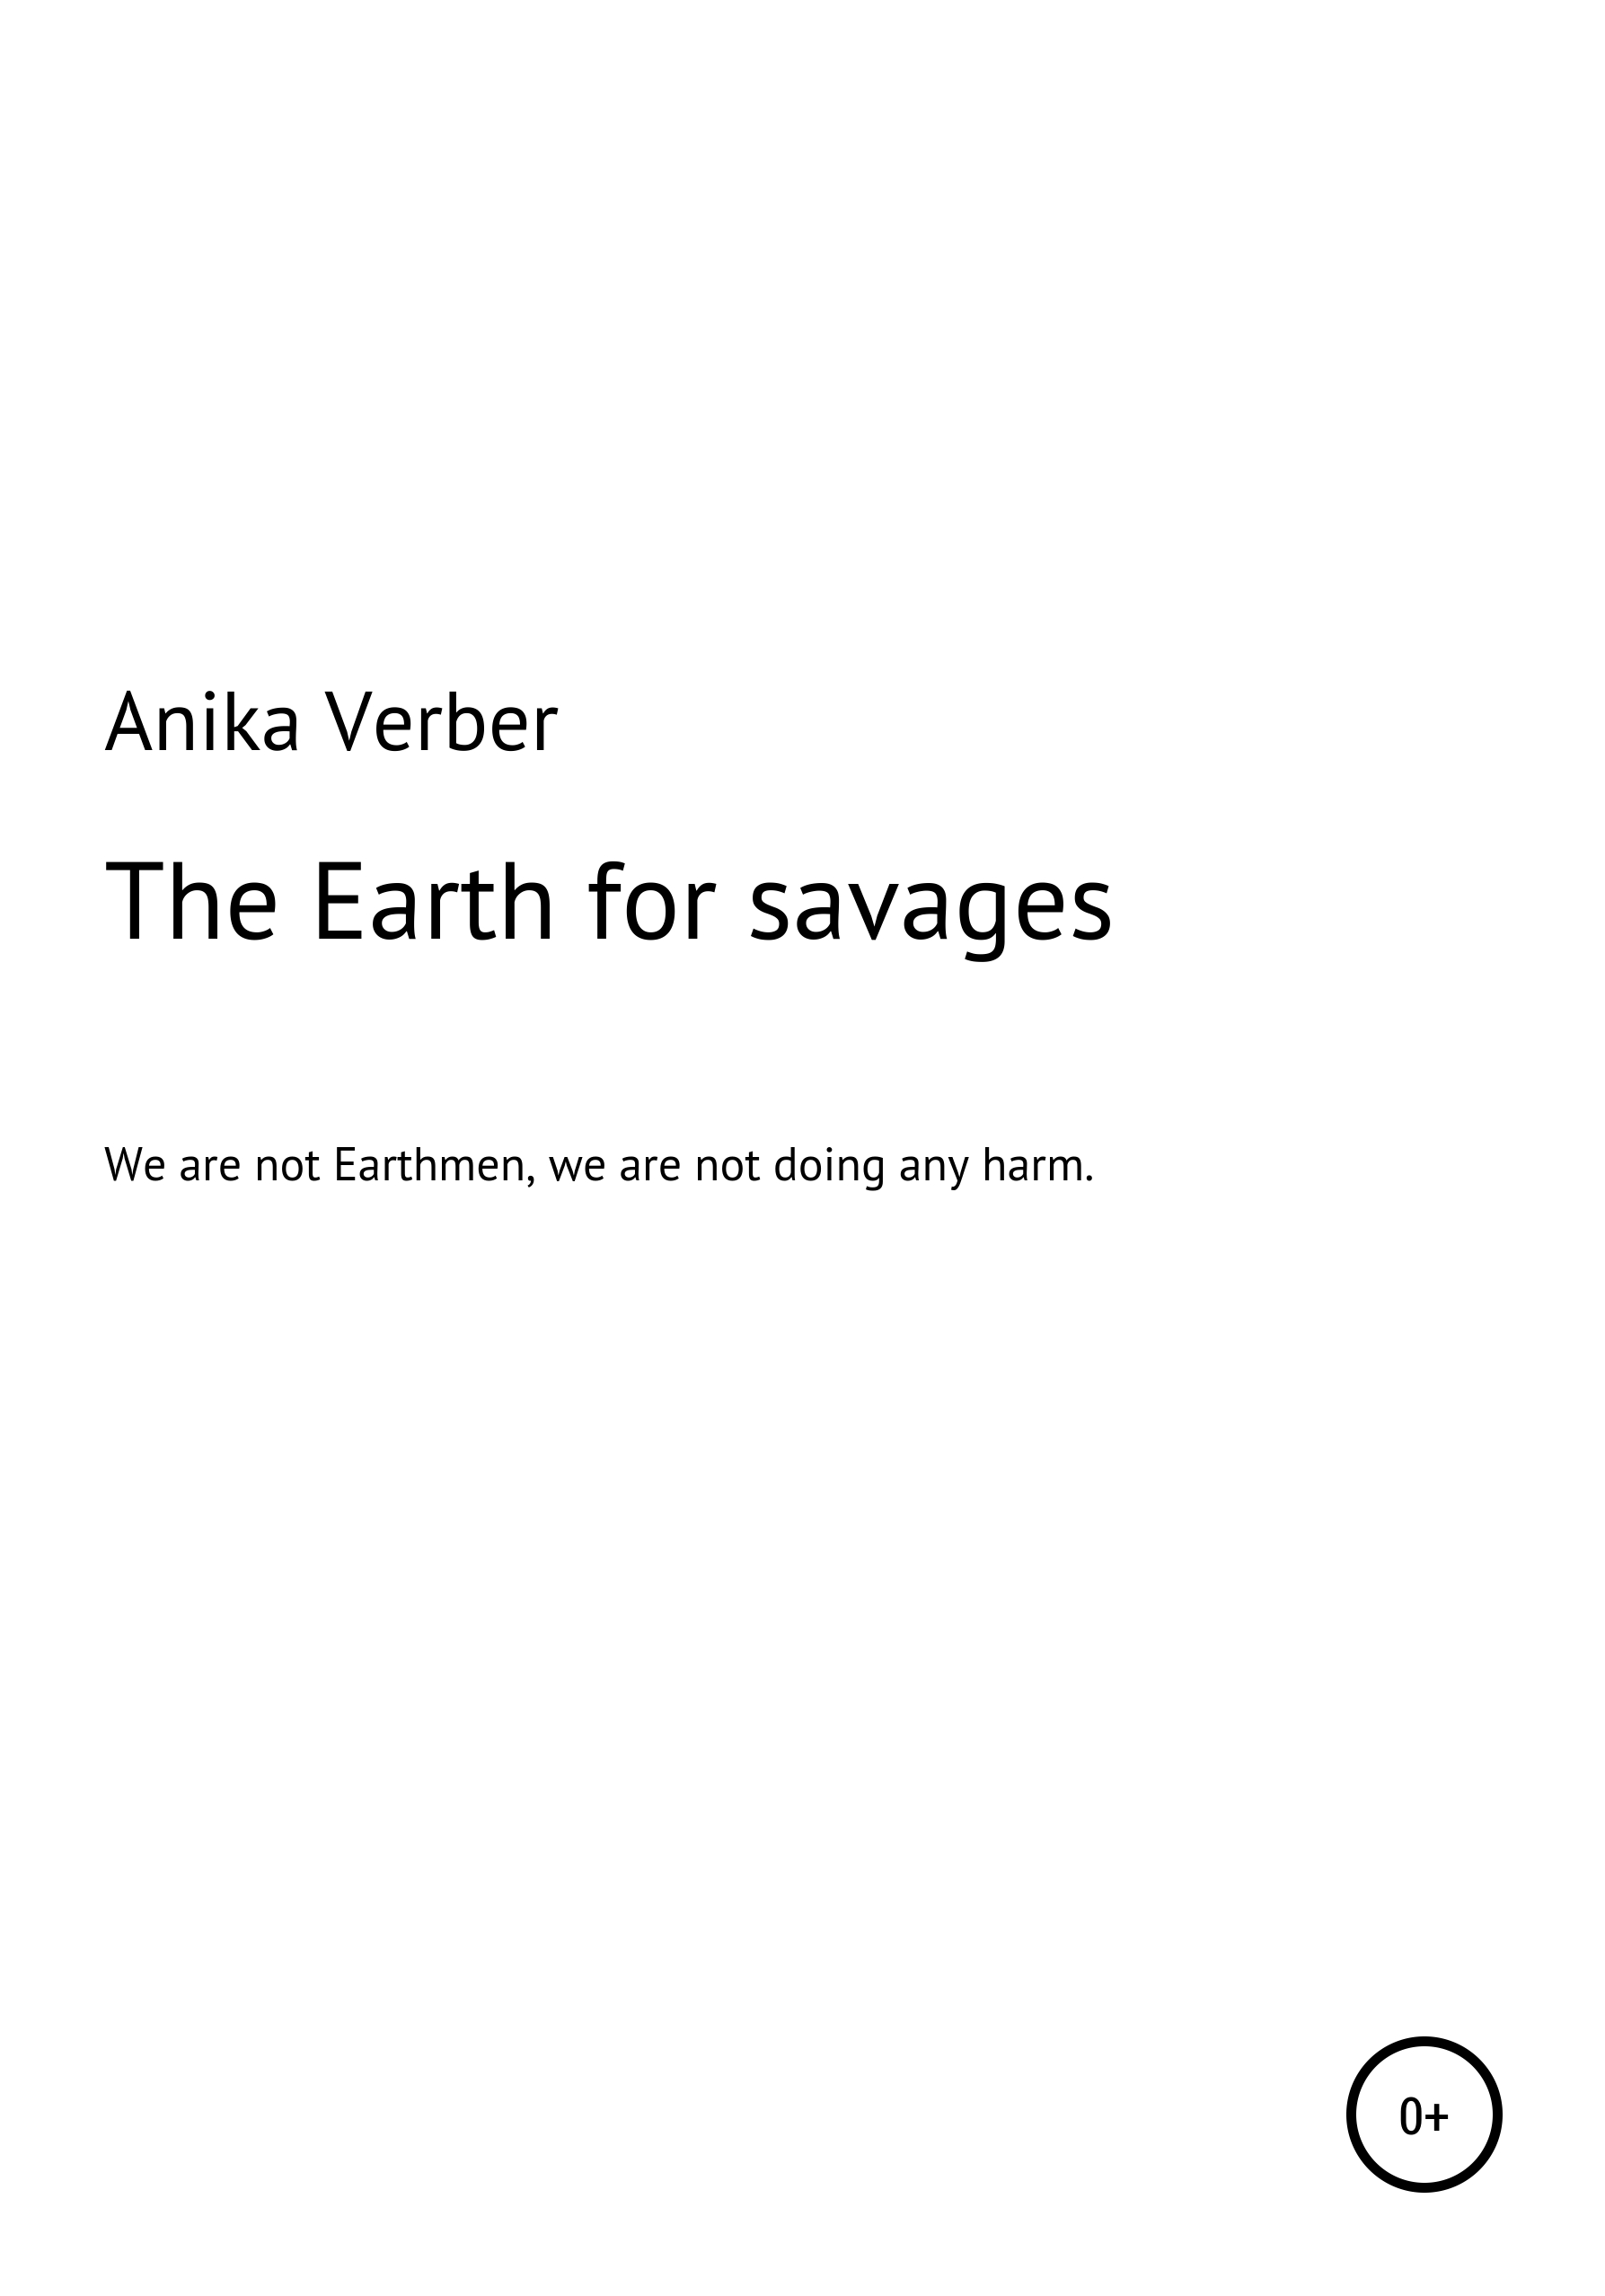 The Earth for savages